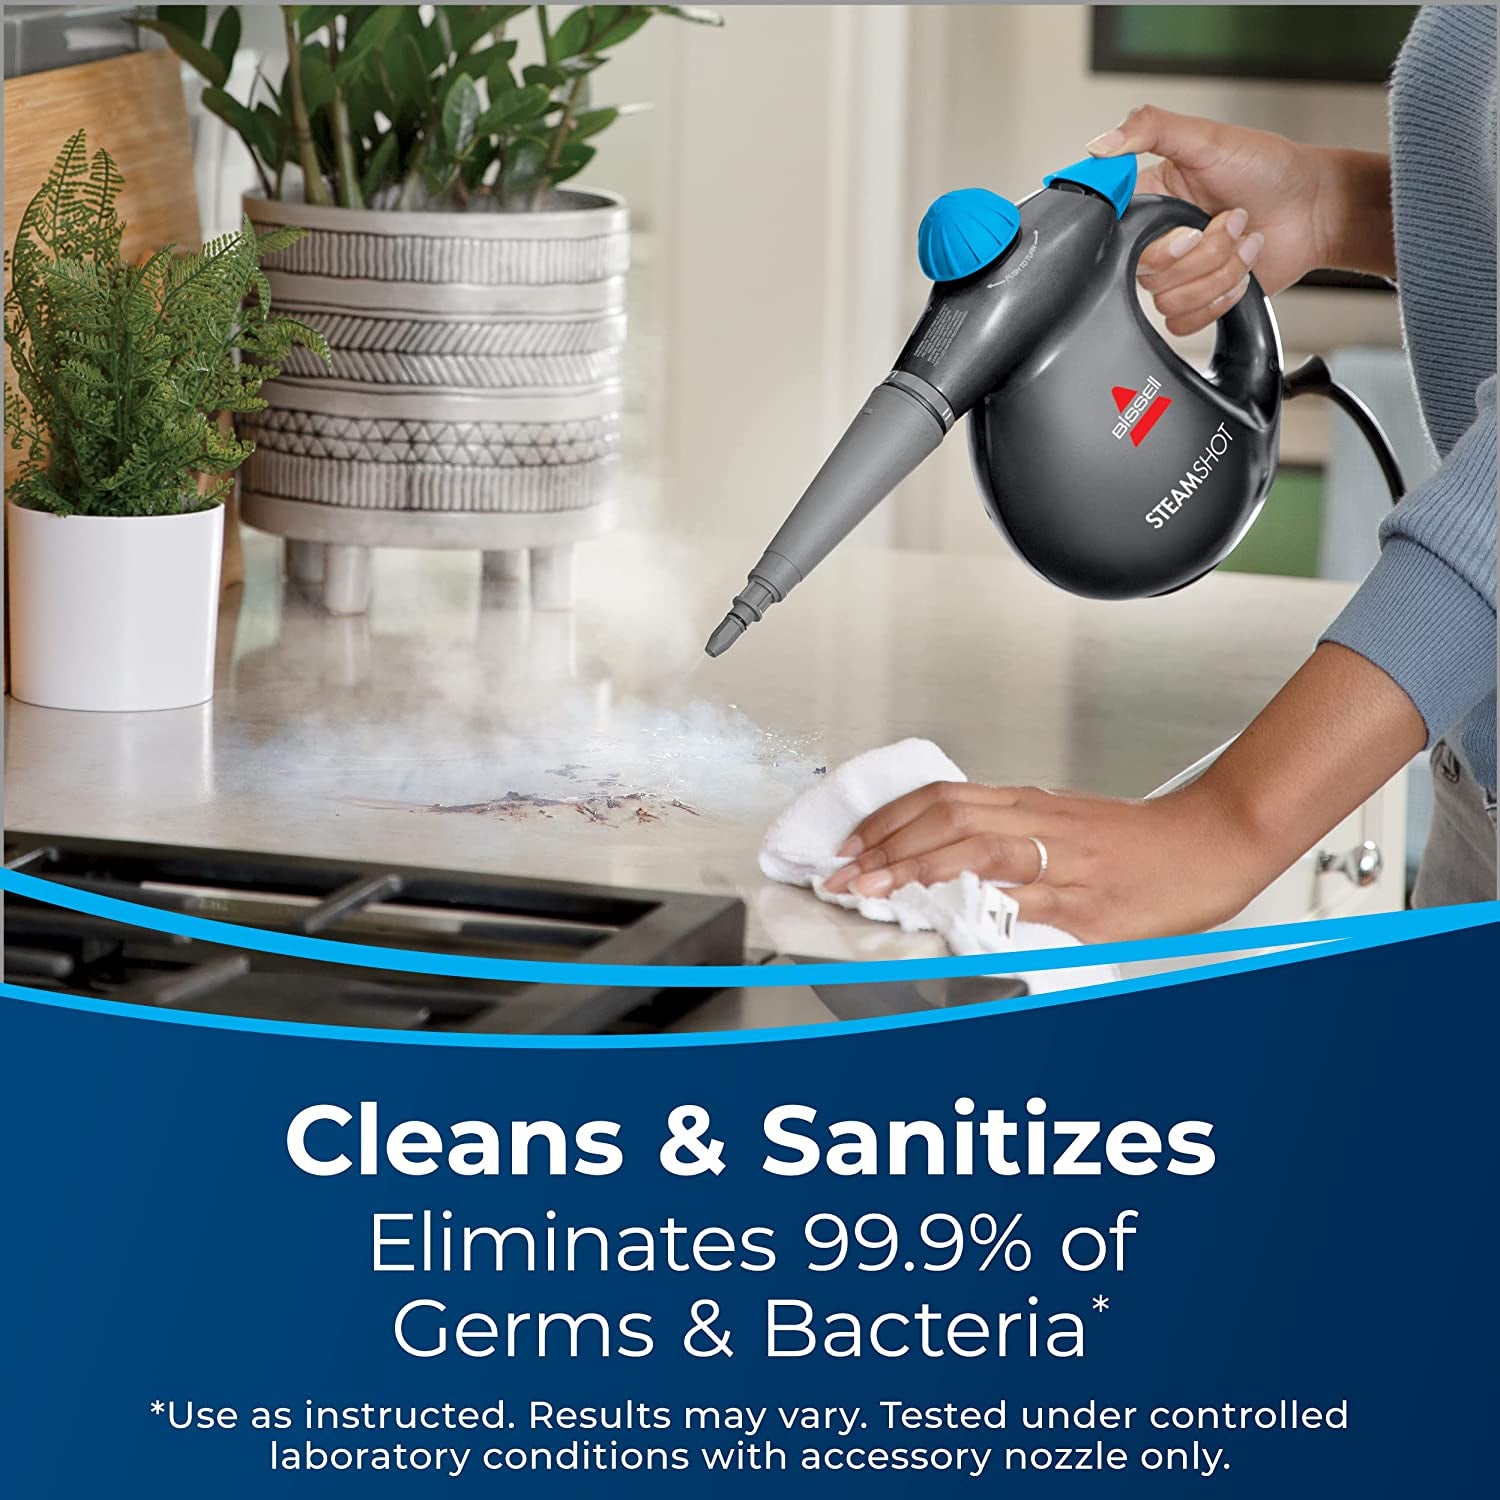 Steamshot Hard Surface Steam Cleaner with Natural Sanitization, Multi-Surface Tools Included to Remove Dirt, Grime, Grease, and More, 39N7V